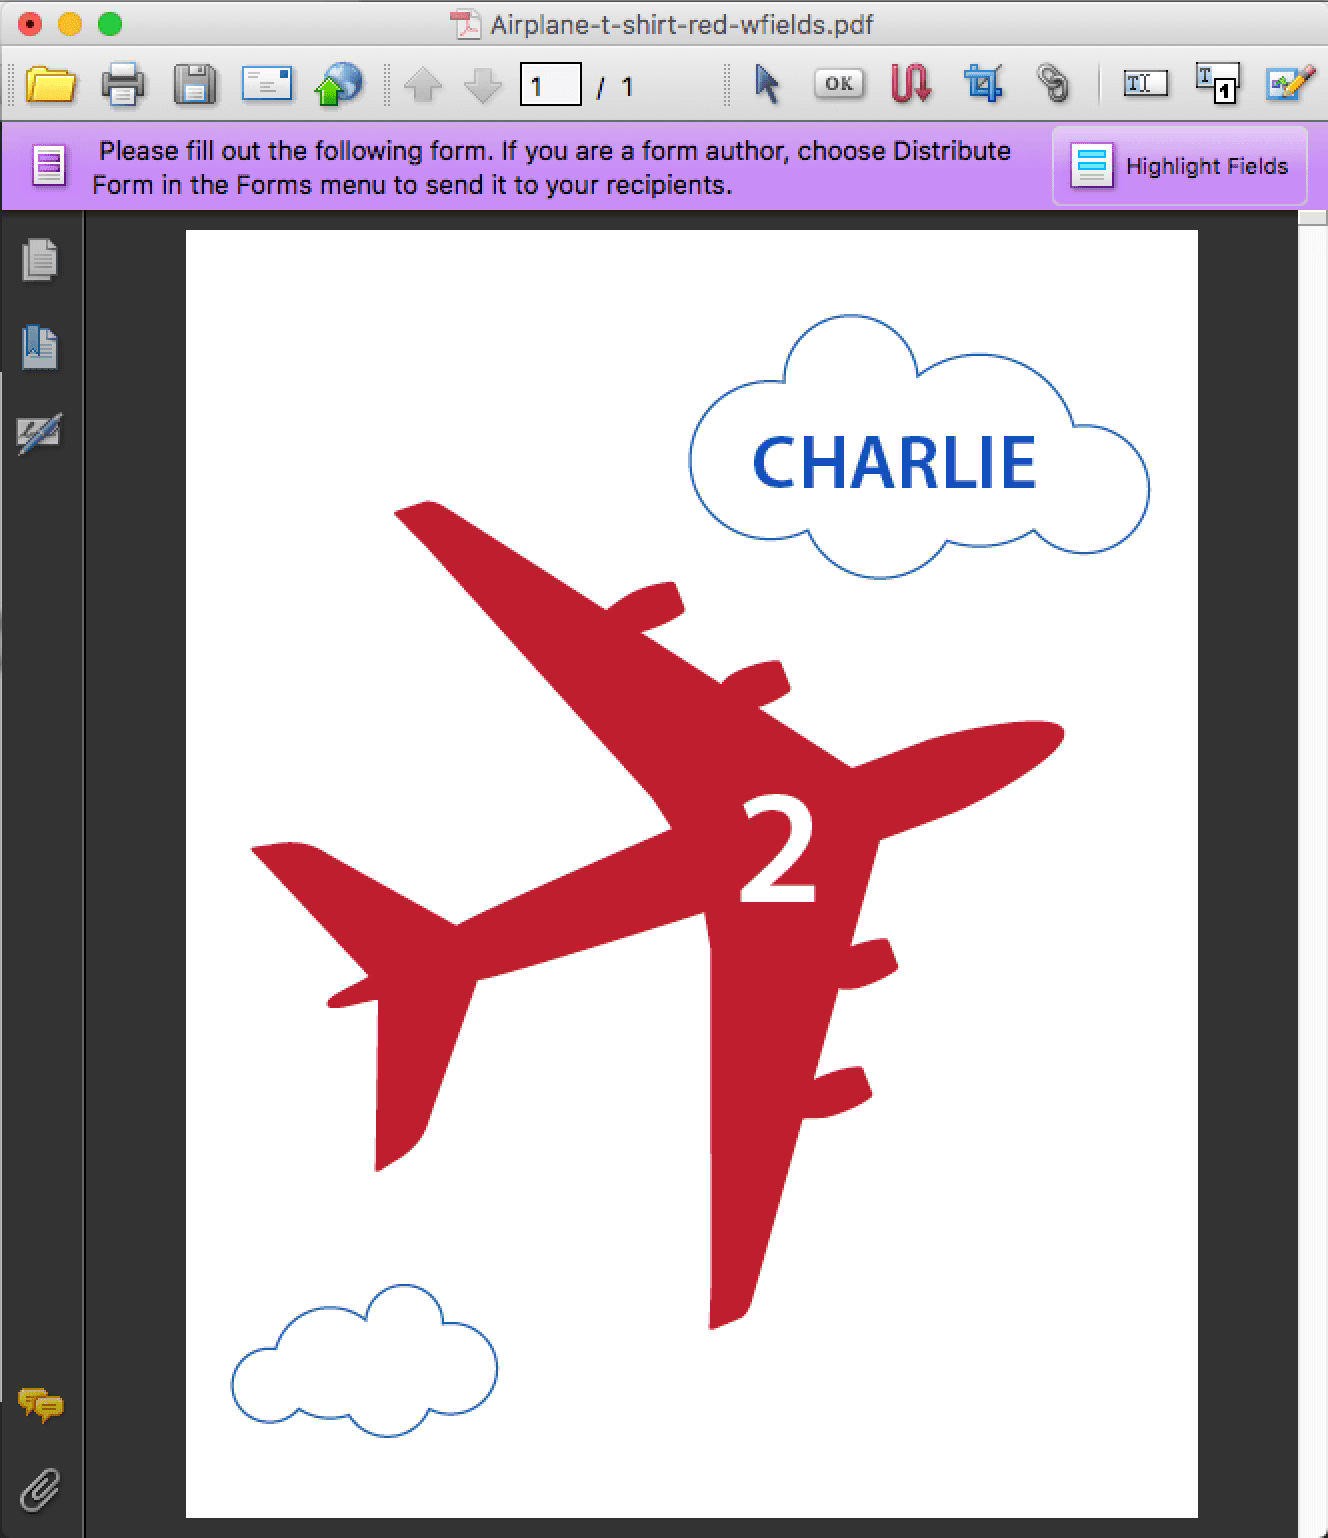 DIY red and blue personalized airplane iron-on t-shirt